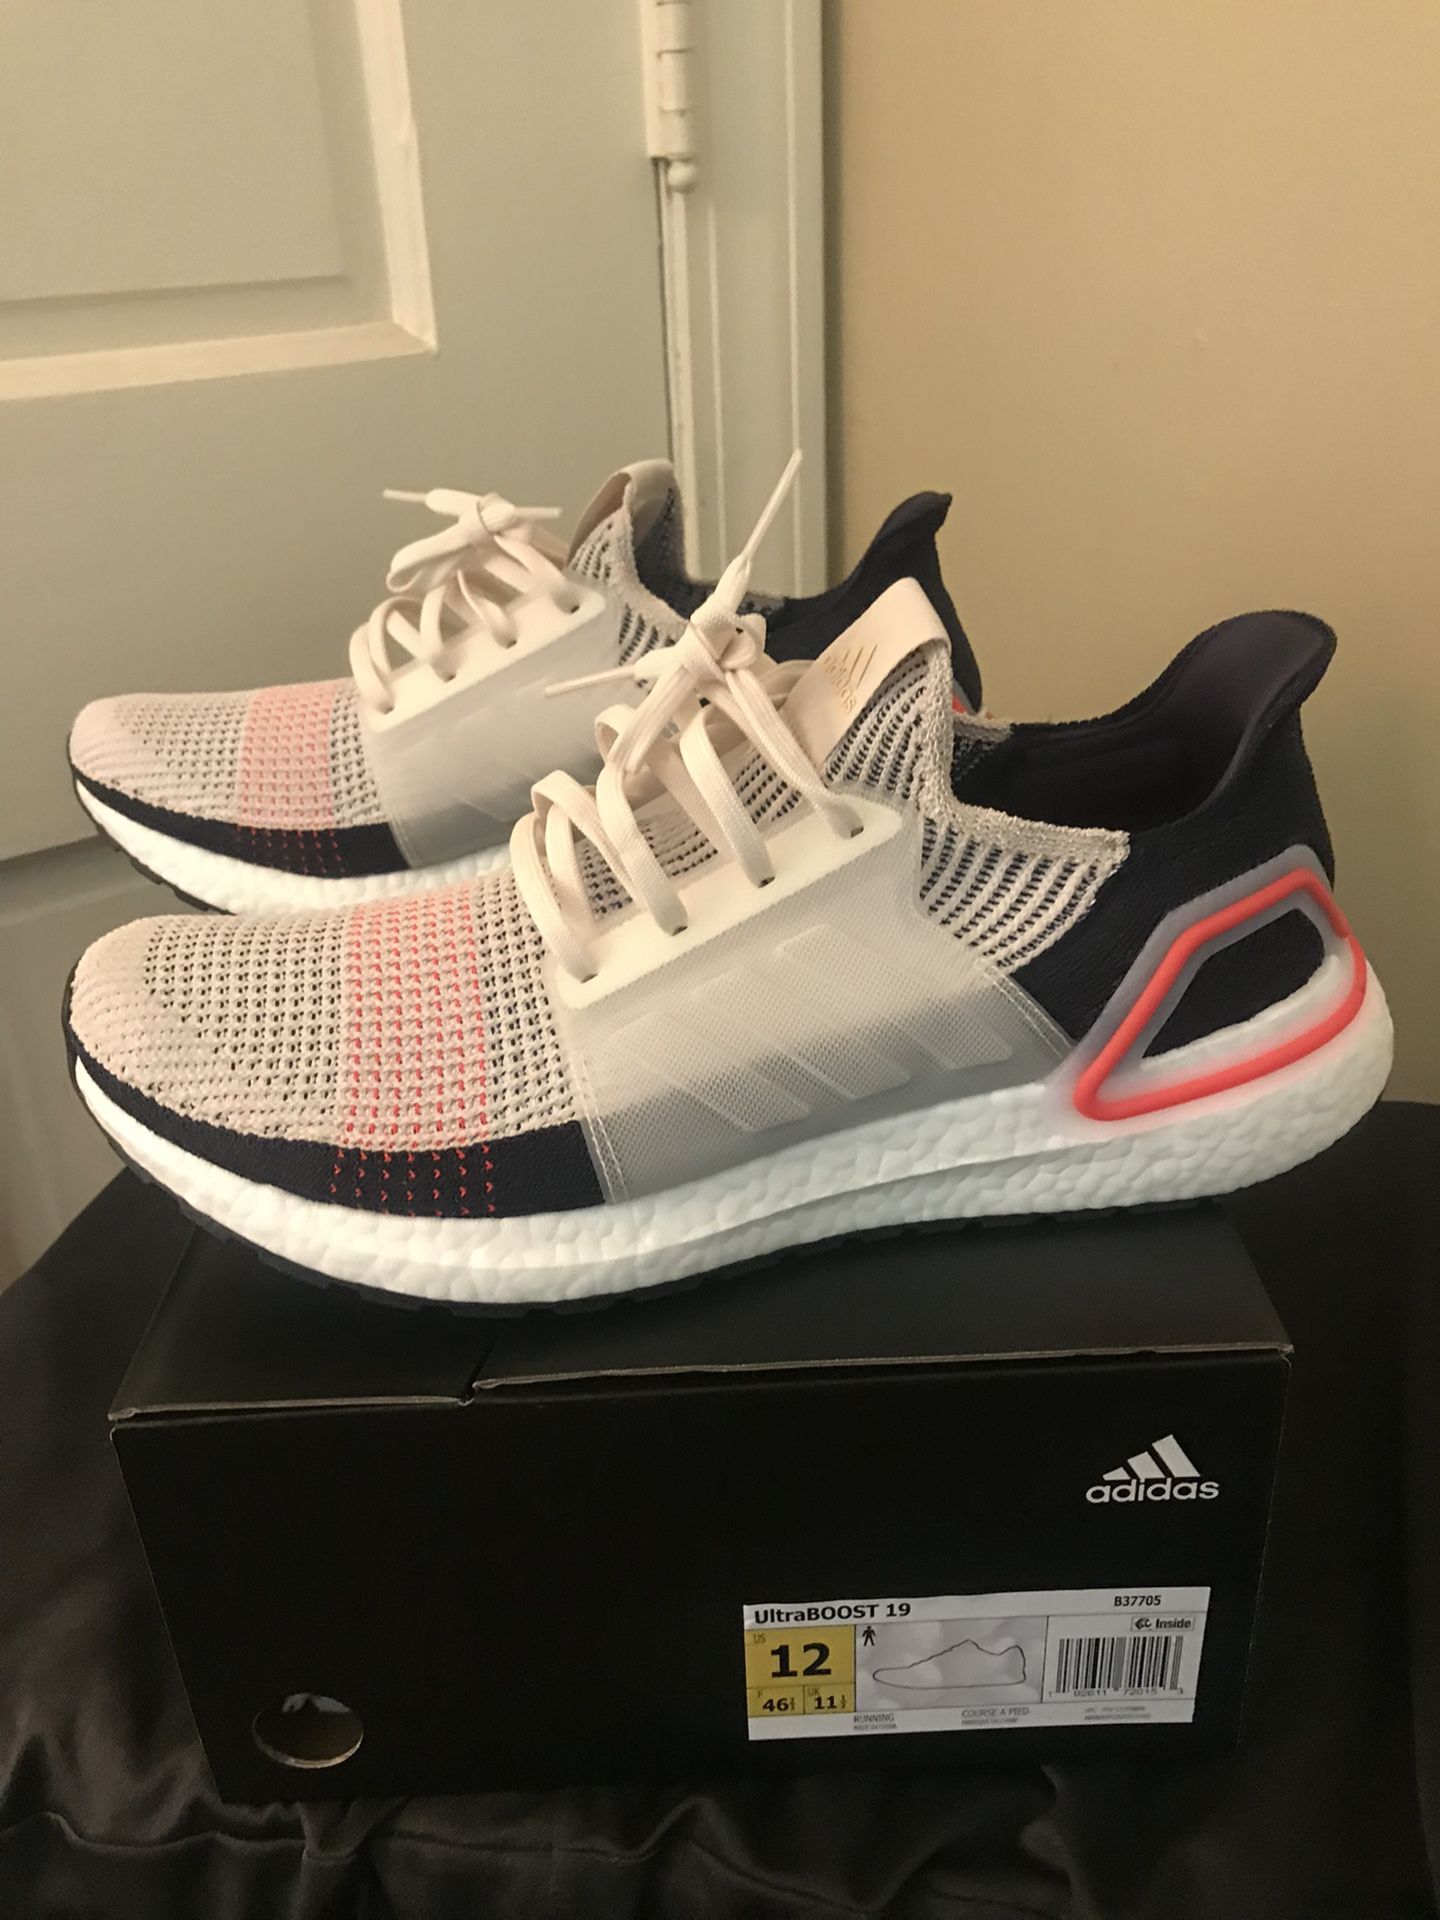 Adidas ultraboost 19size Og box 📦 and 🏷